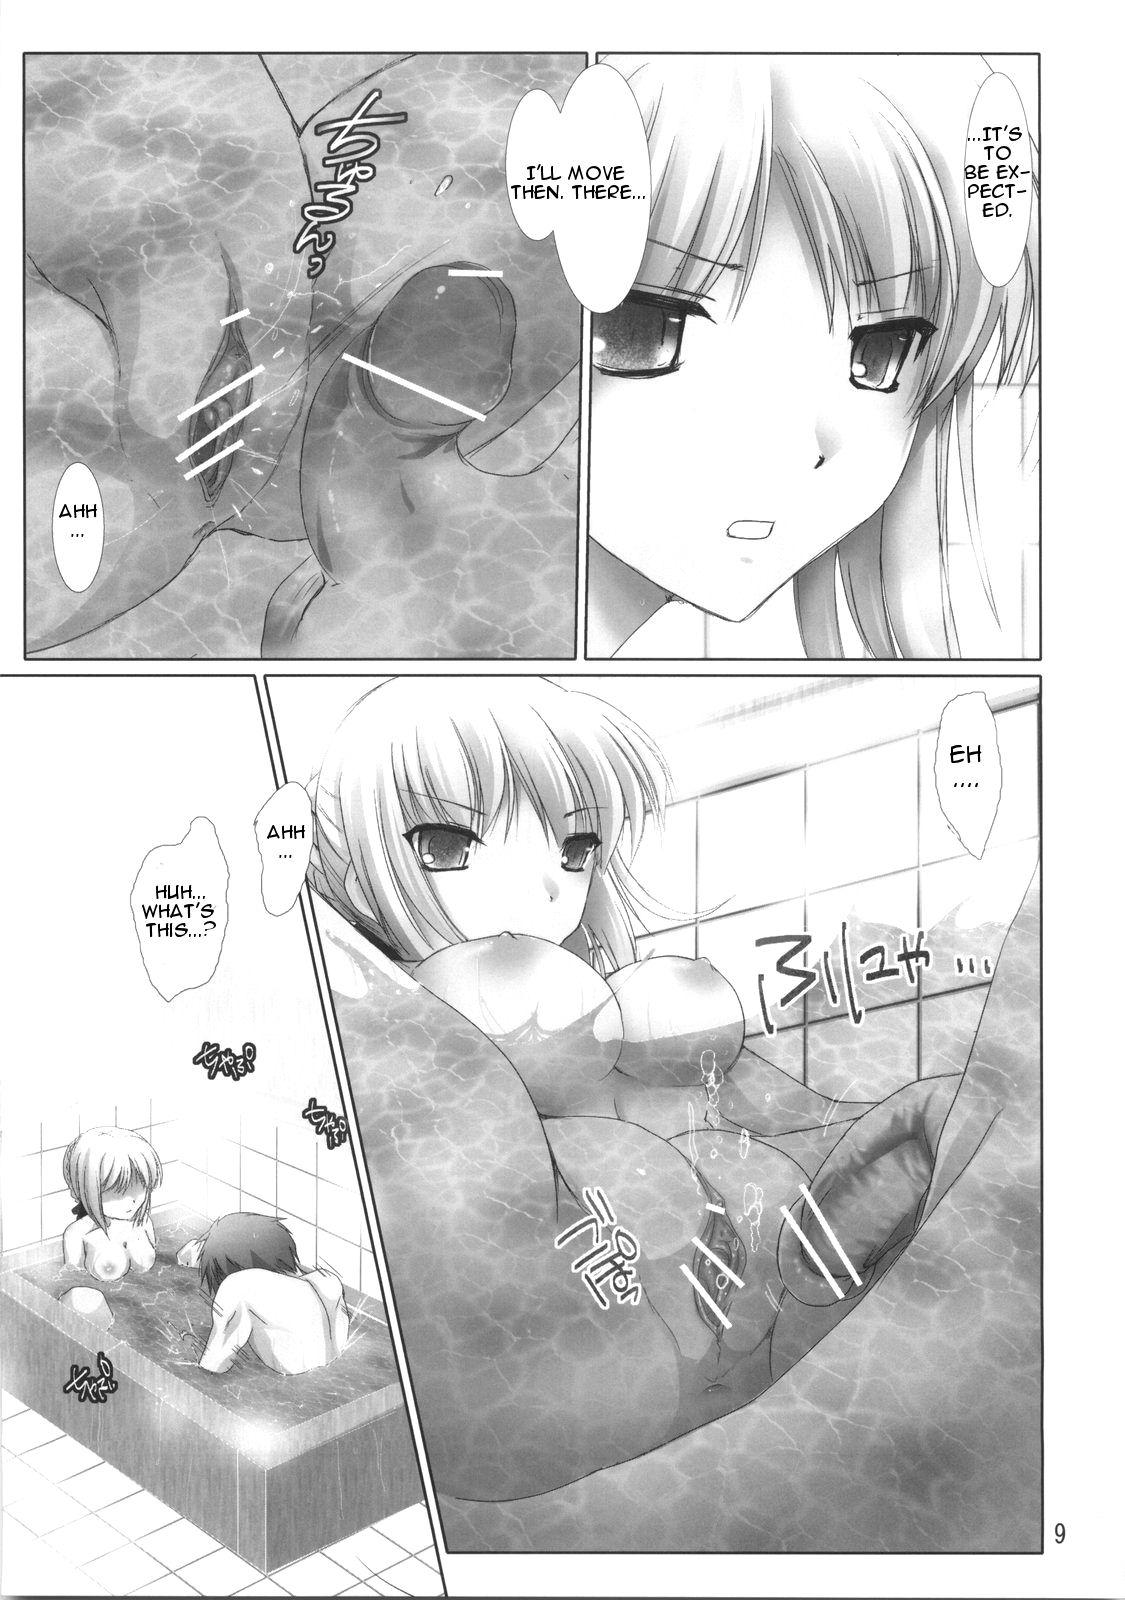 Domination BLACK 99% - Fate stay night Fate hollow ataraxia Black Dick - Page 8